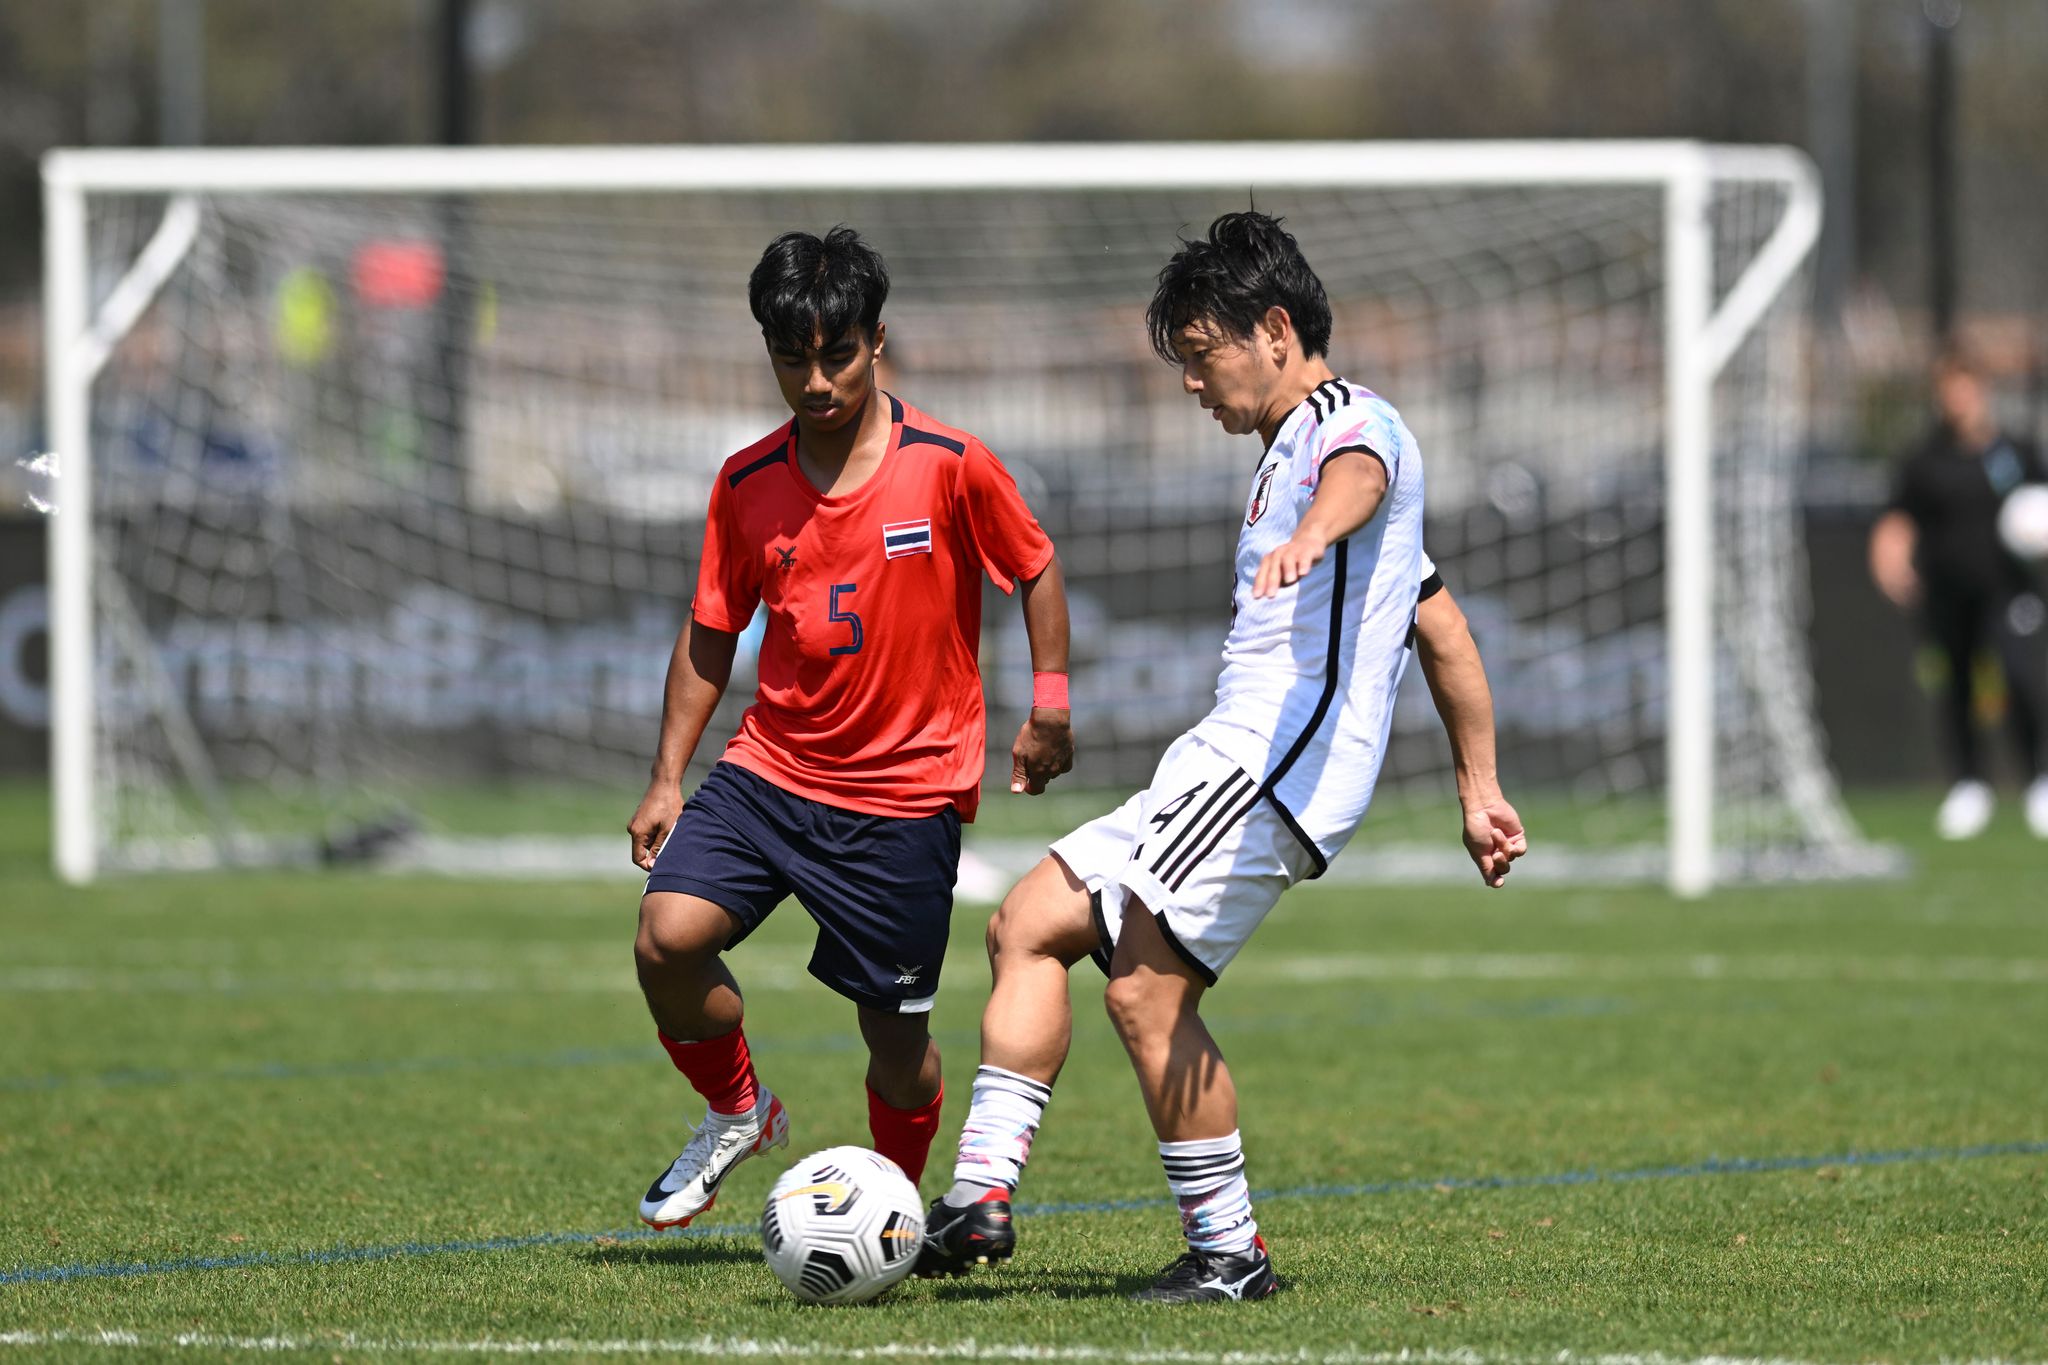 Attan Tahe of Thailand and Hiroki Kameno of Japan compete for the ball